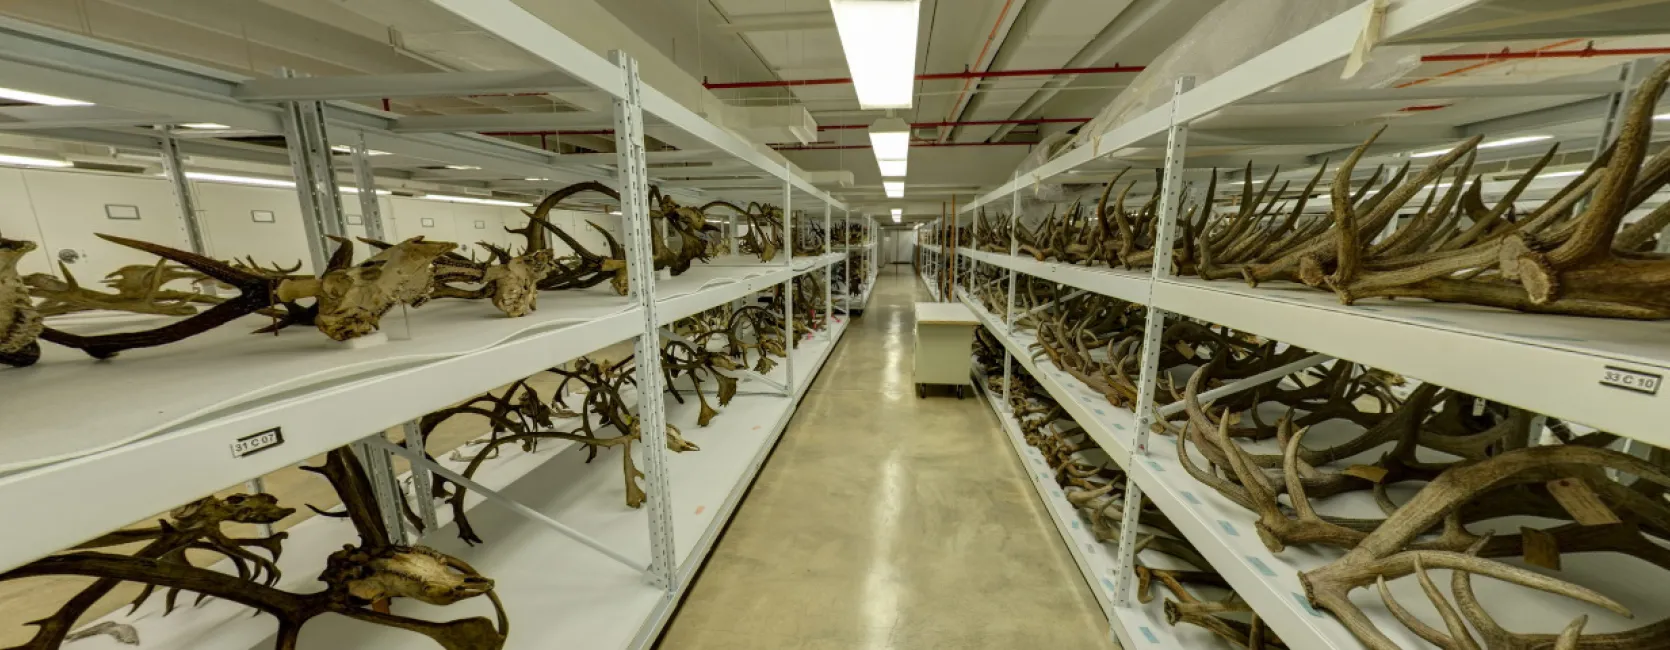 Antler collection stored at the Museum Support Center